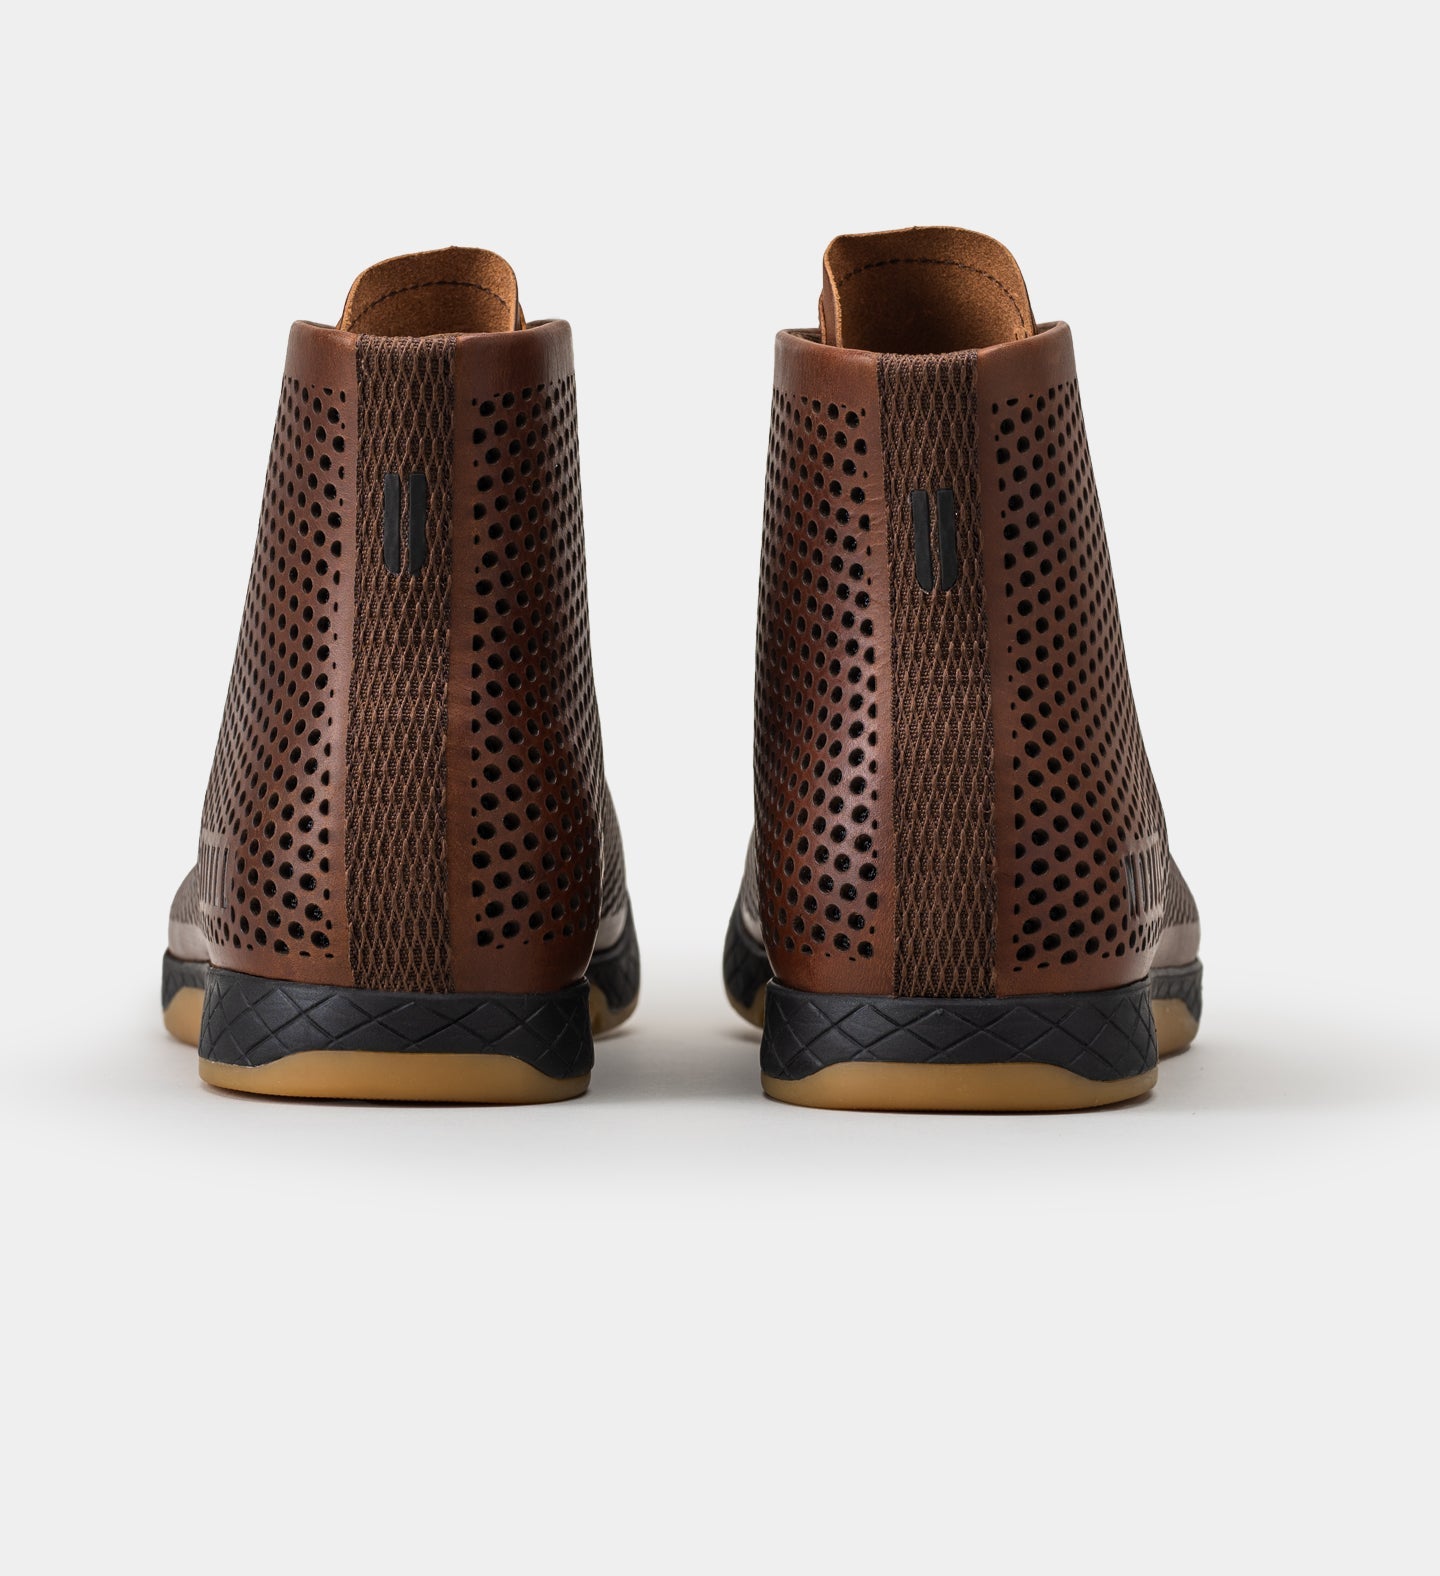 NOBULL - The High-Top Coffee Leather Trainer has already